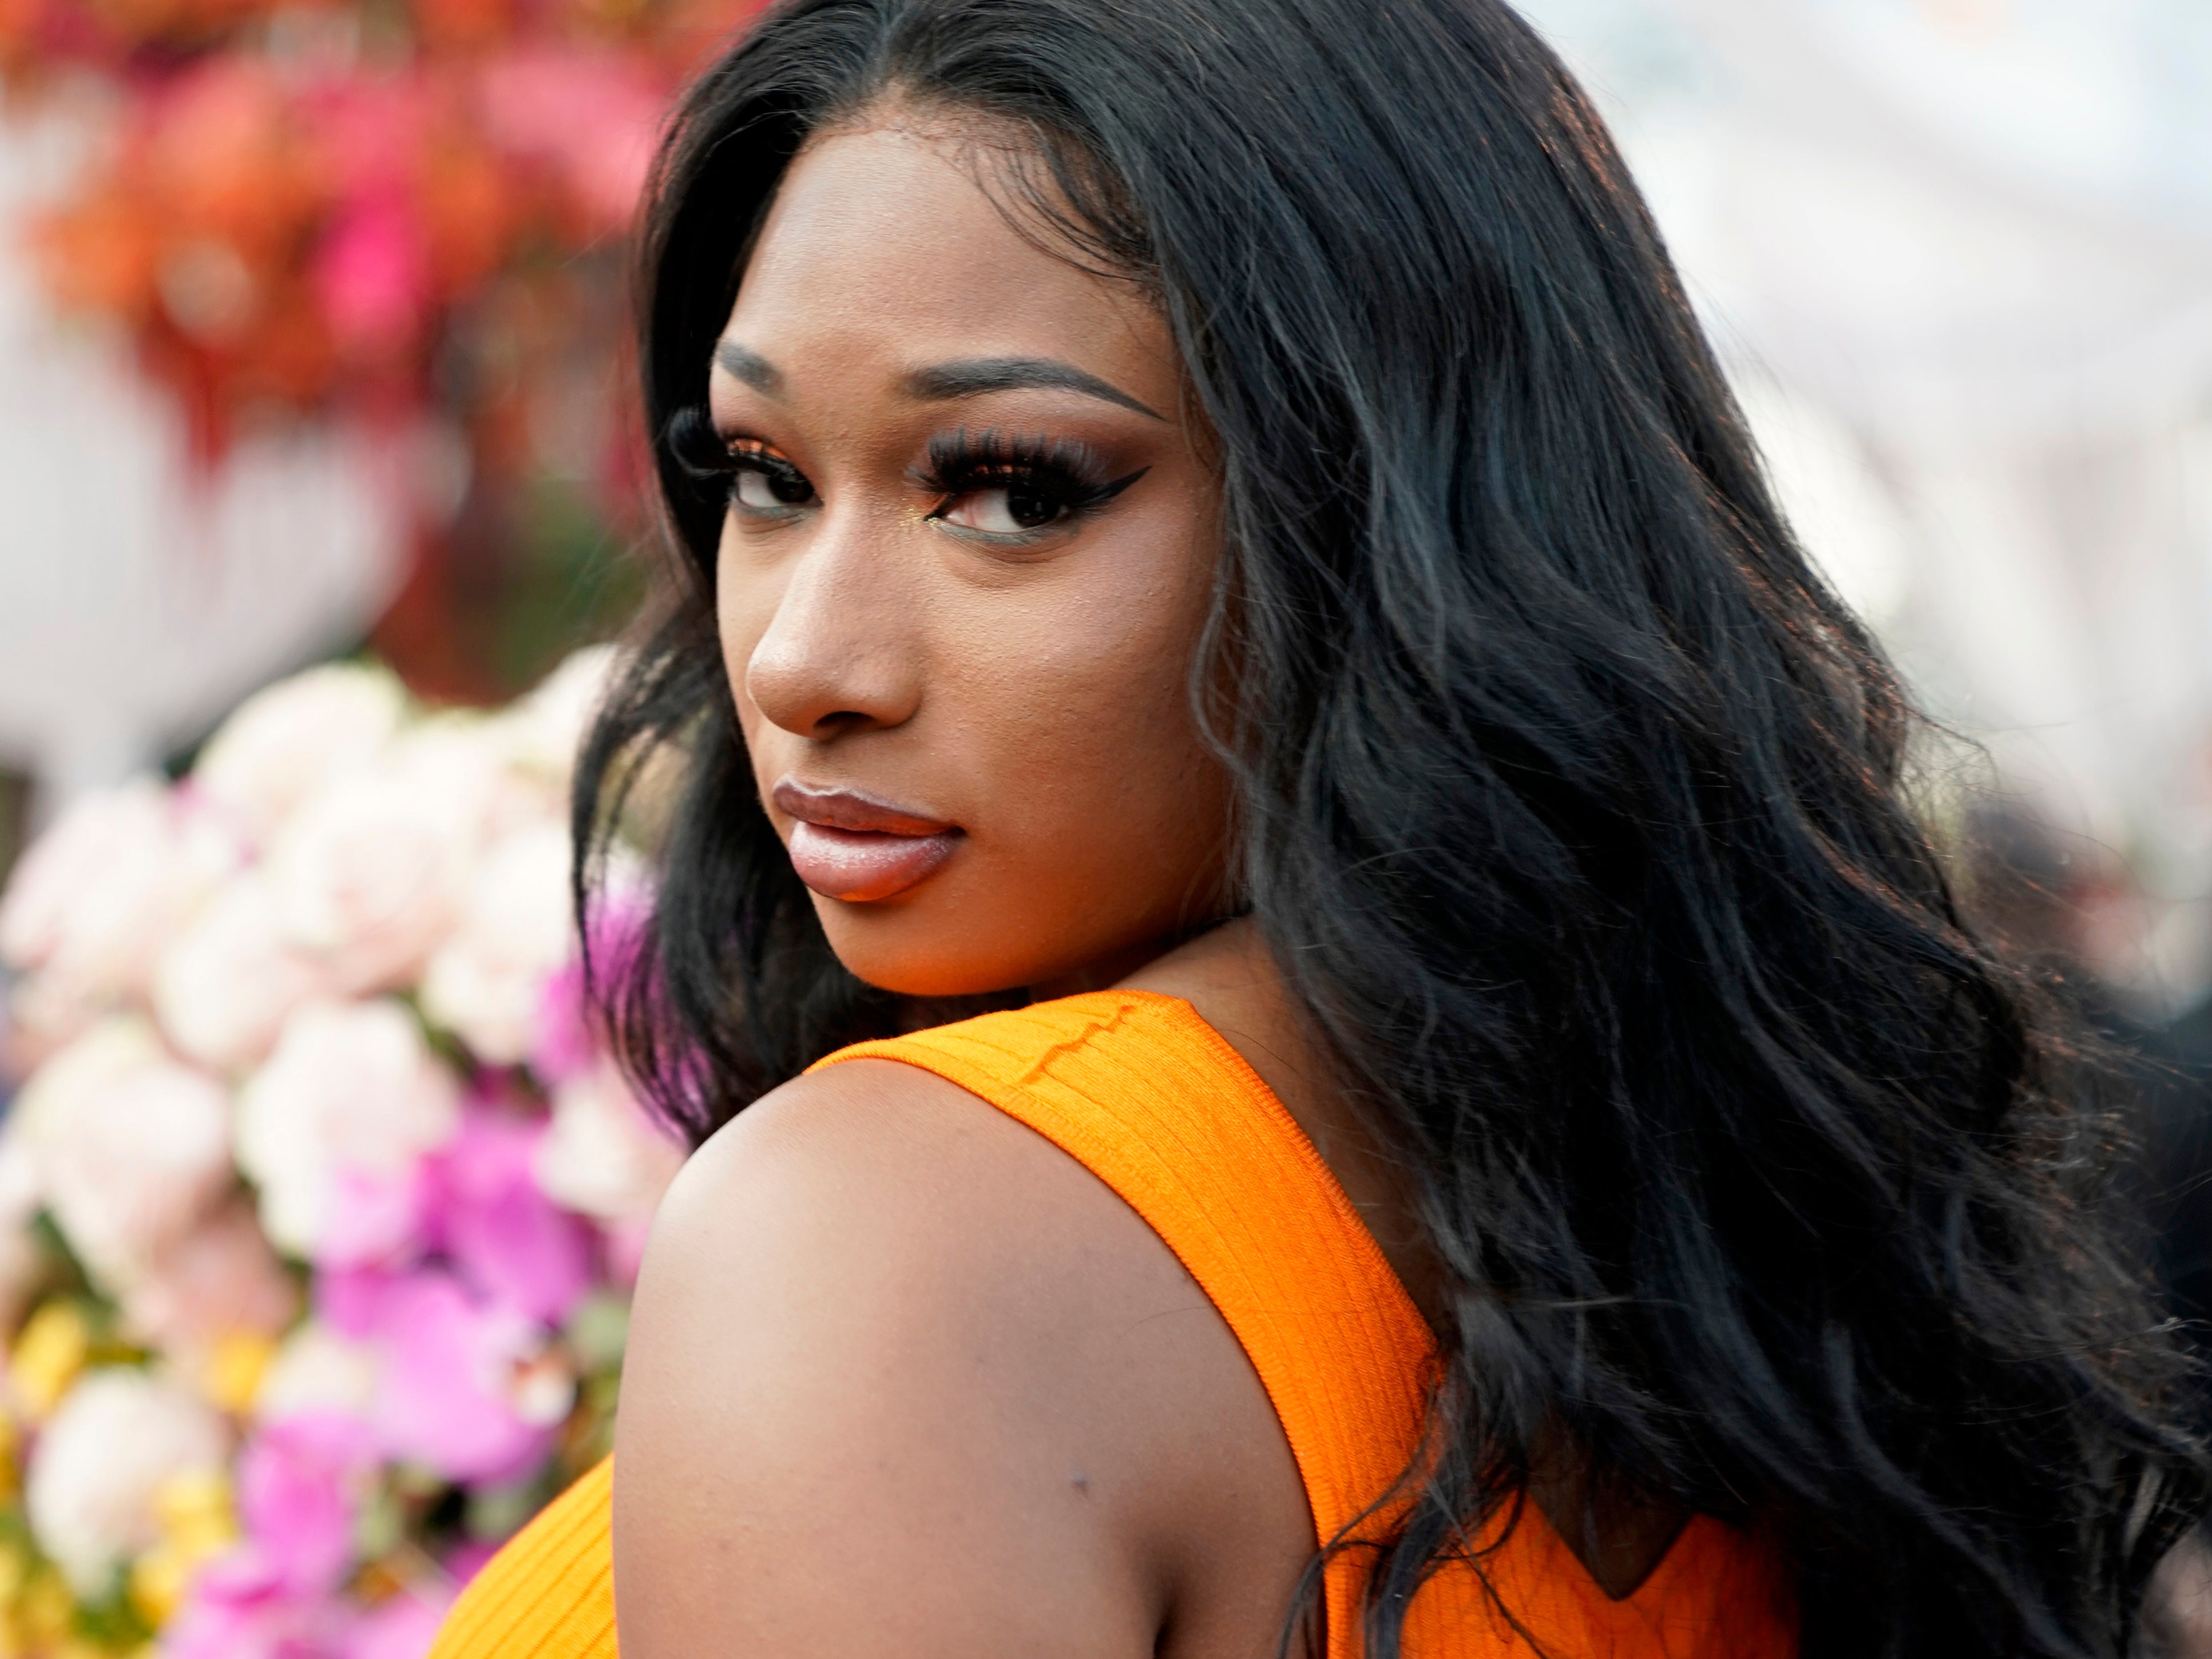 Contemporary female rappers, including Megan Thee Stallion, are notably absent from the documentary